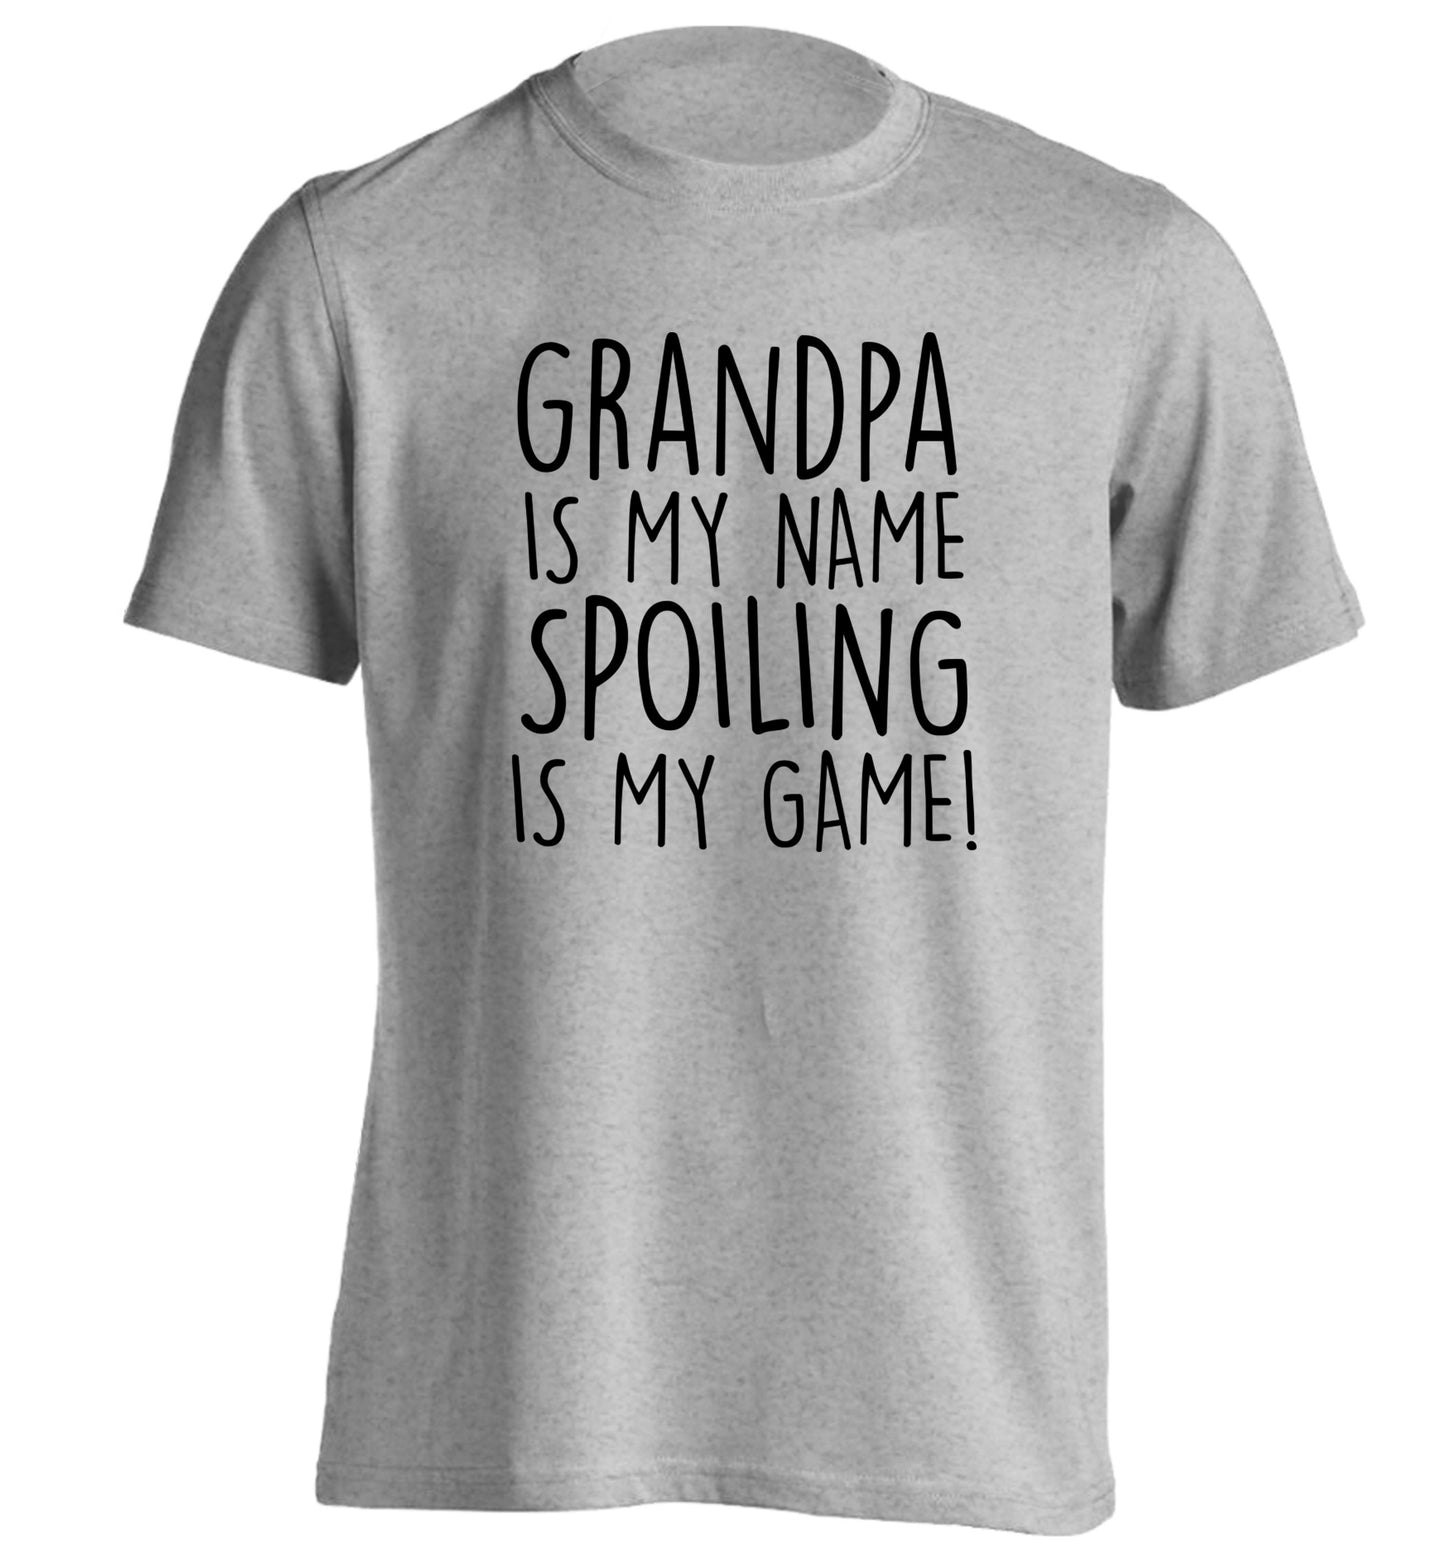 Grandpa is my name, spoiling is my game adults unisex grey Tshirt 2XL